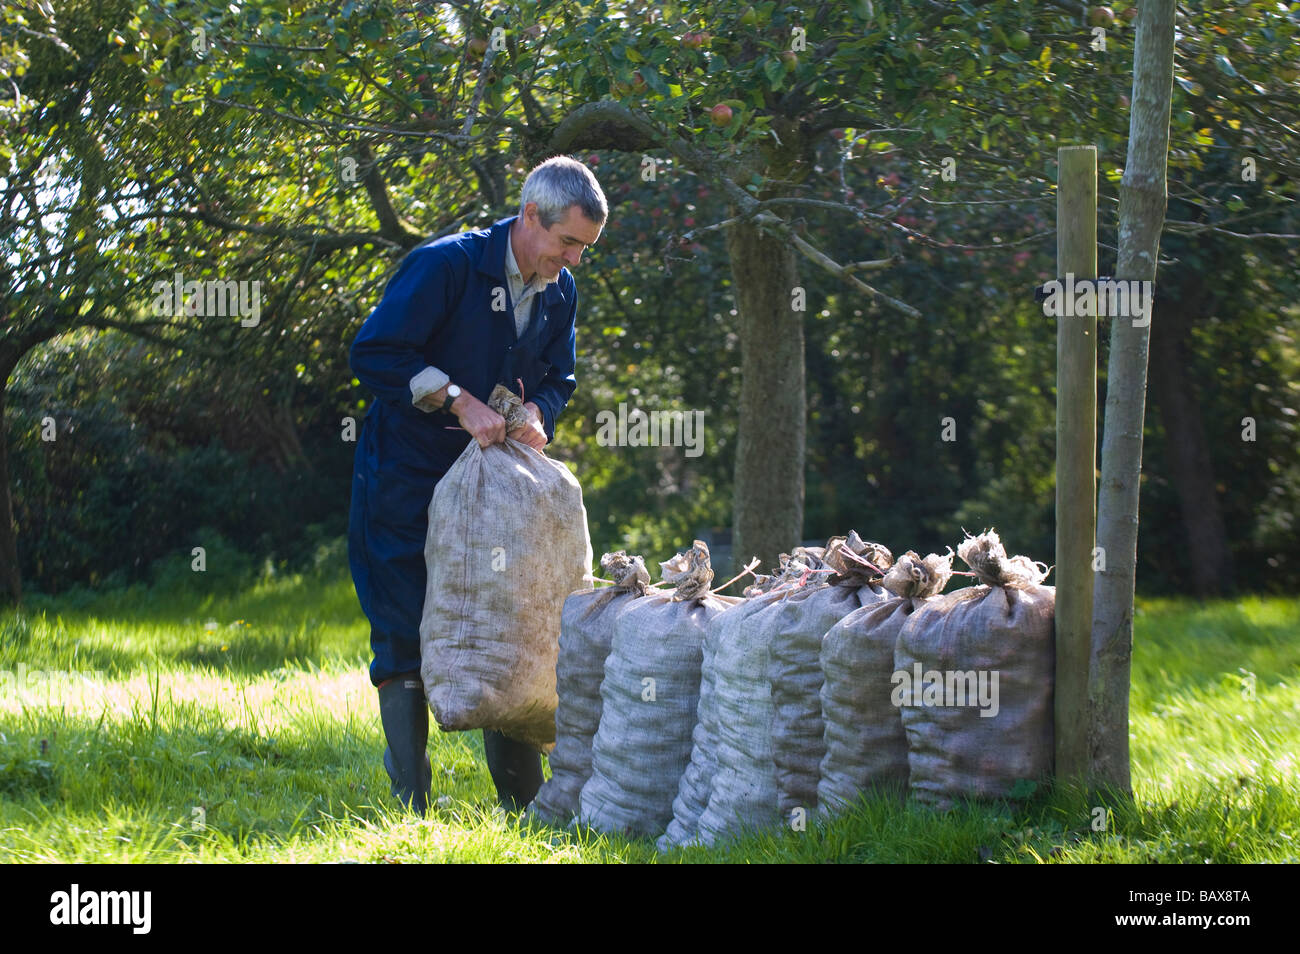 Collecting cider apples in apple orchard near Glastonbury Somerset England Stock Photo